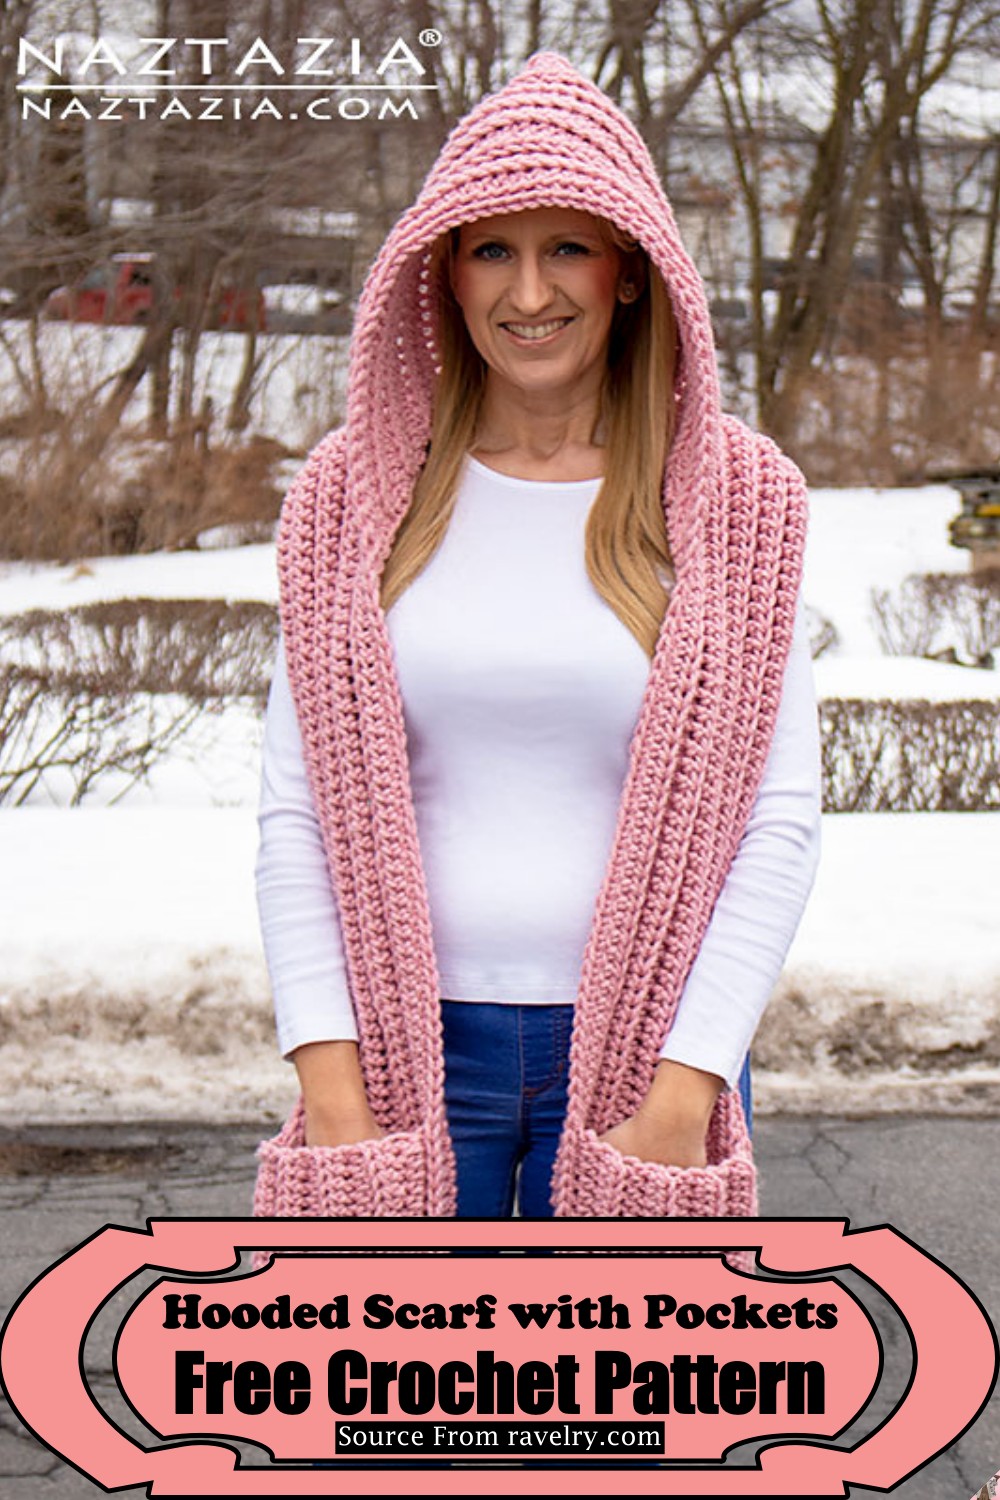 Hooded Scarf with Pockets